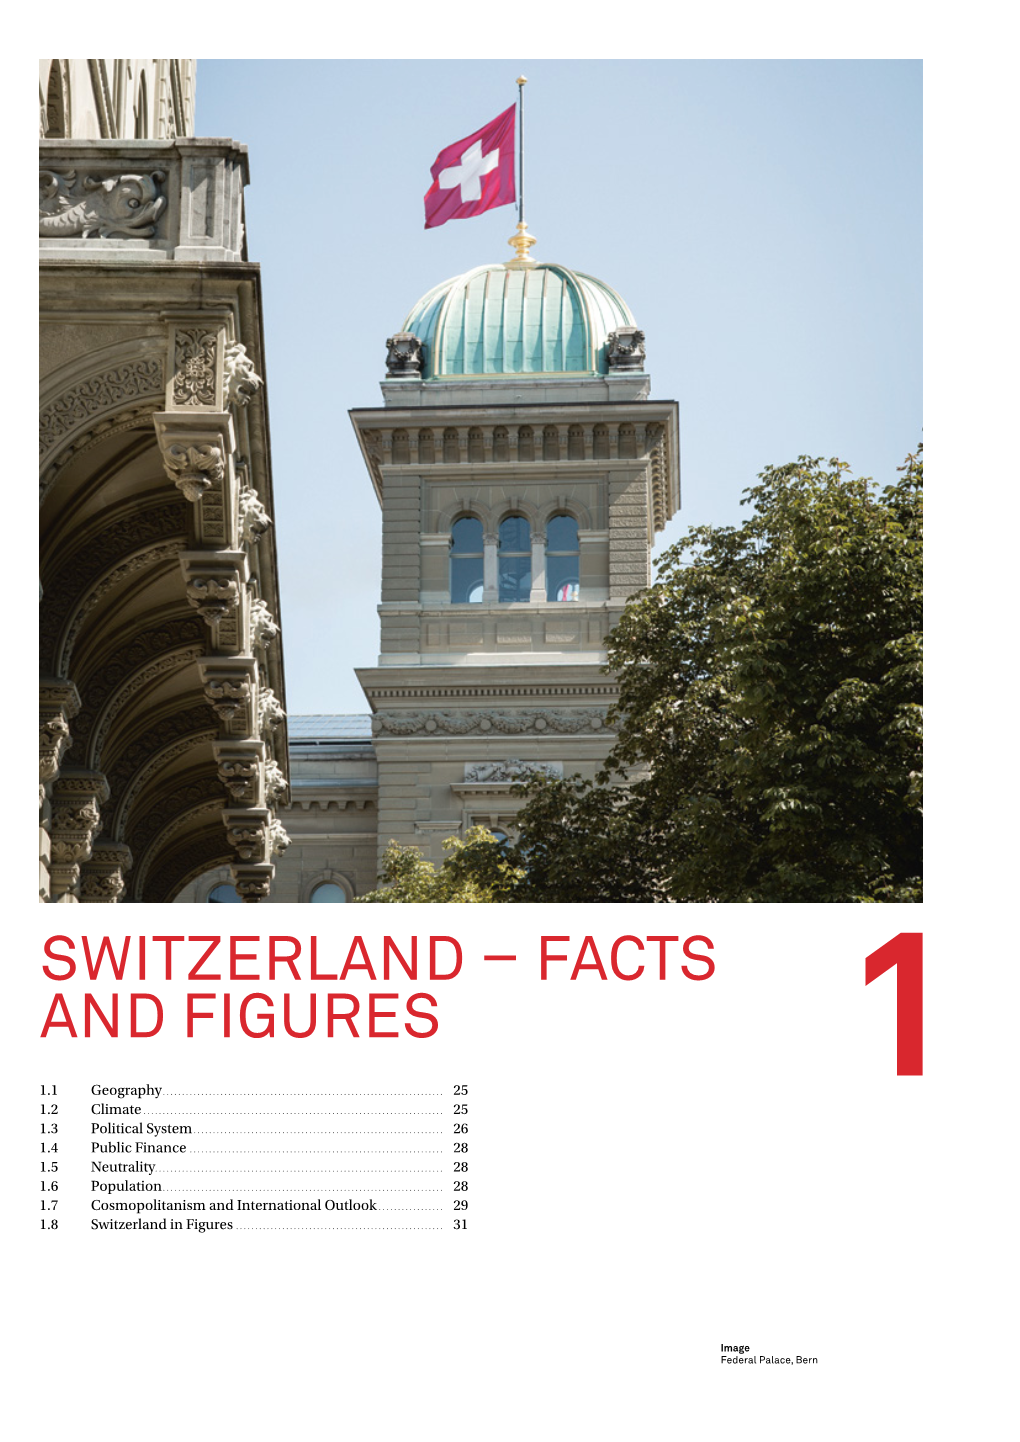 Switzerland – Facts and Figures